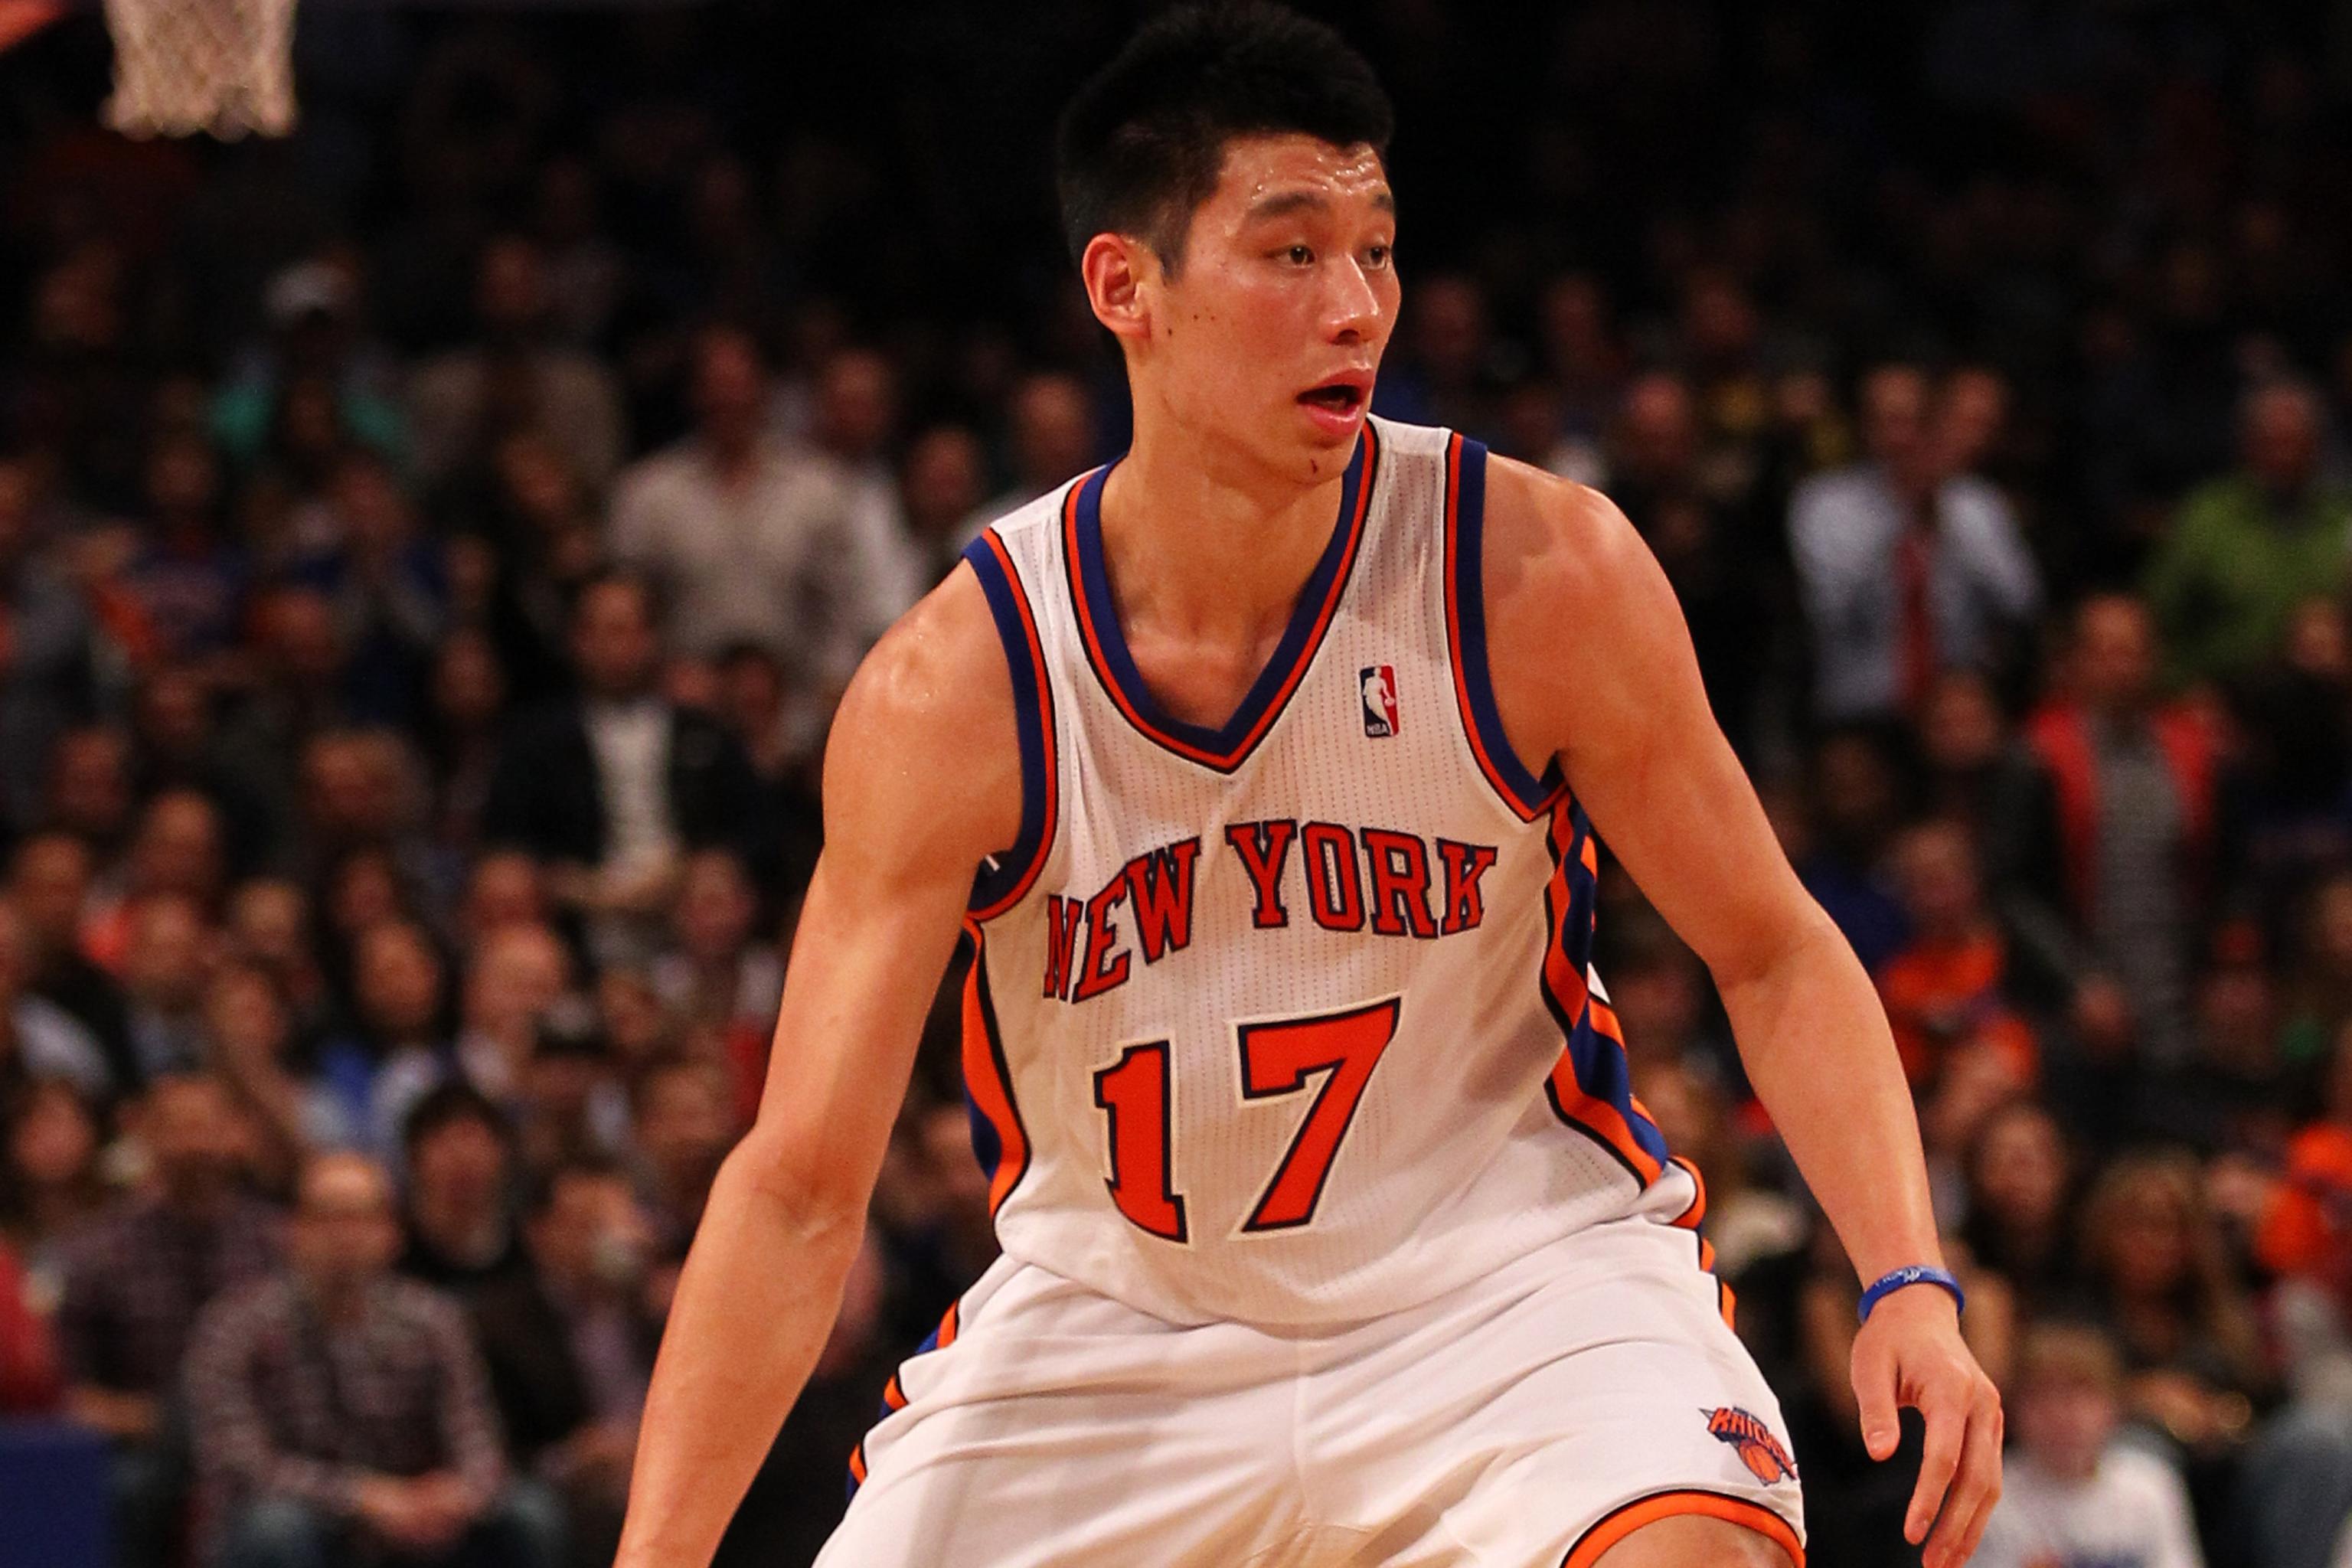 Harvard in the NBA: Jeremy Lin Earns First Start with New York